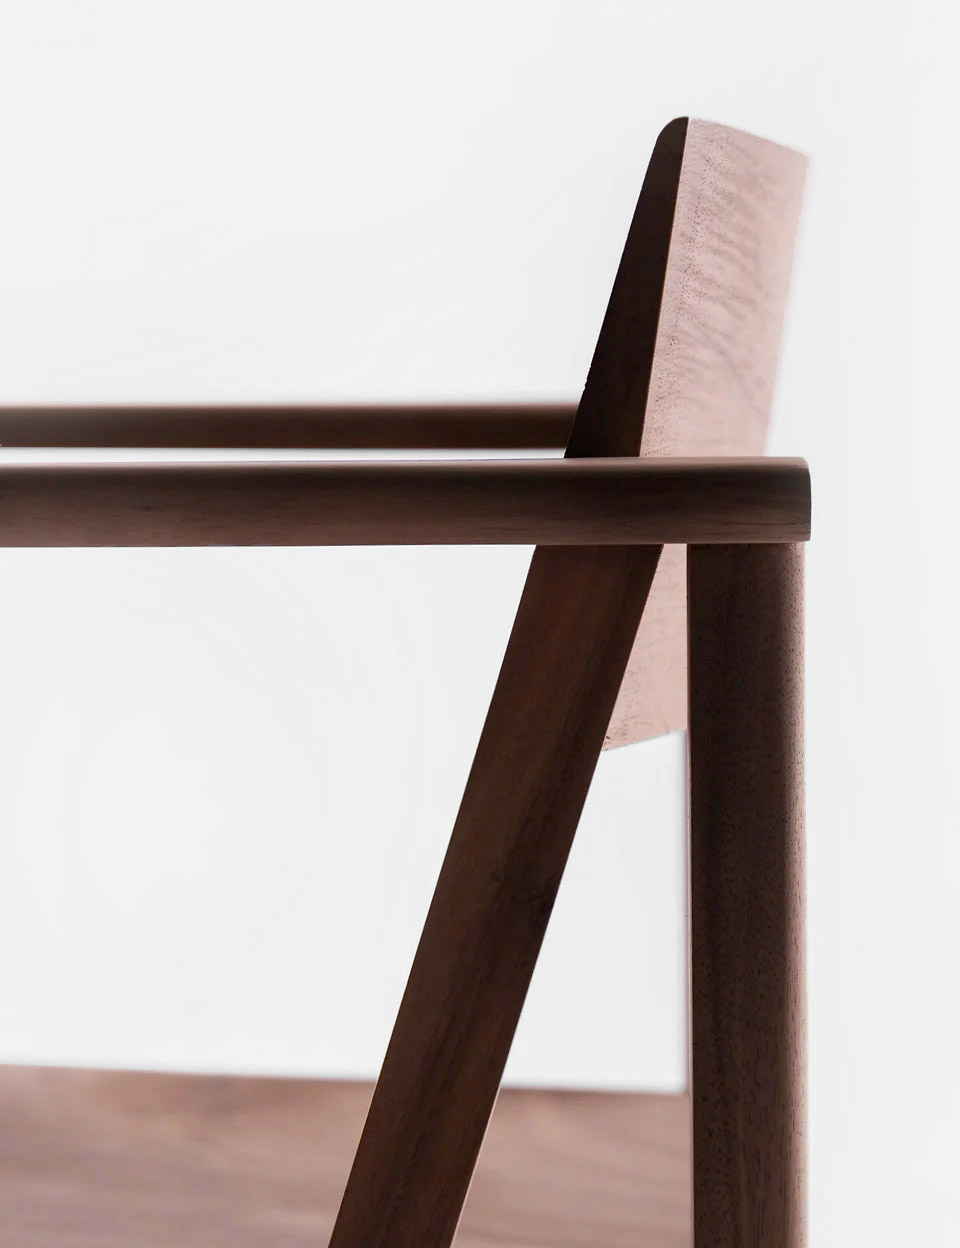 Detail of the chair, Photography by Nontarat Hasitapong